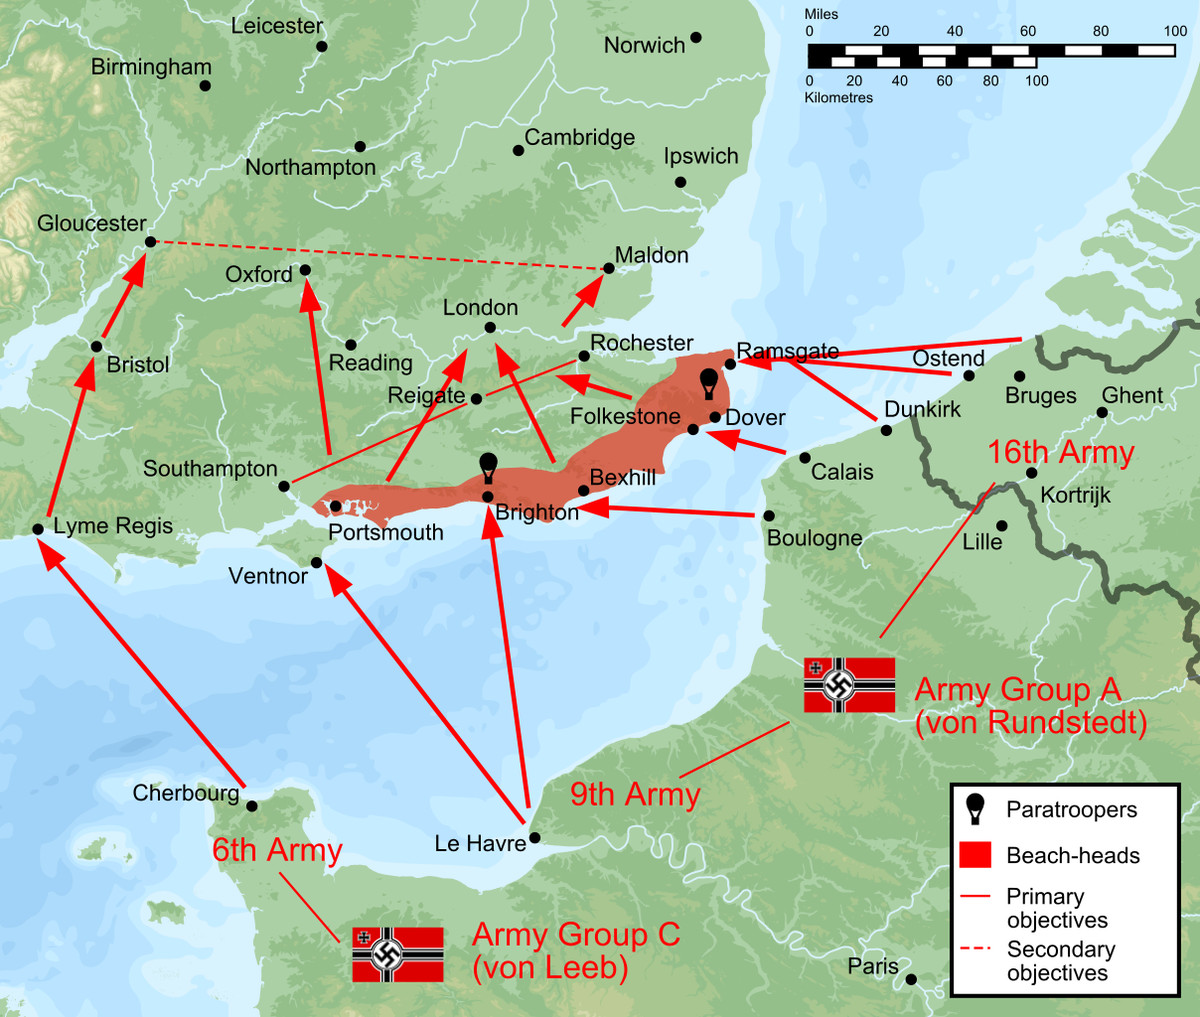 The amphibious invasion of the United Kingdom that never happened